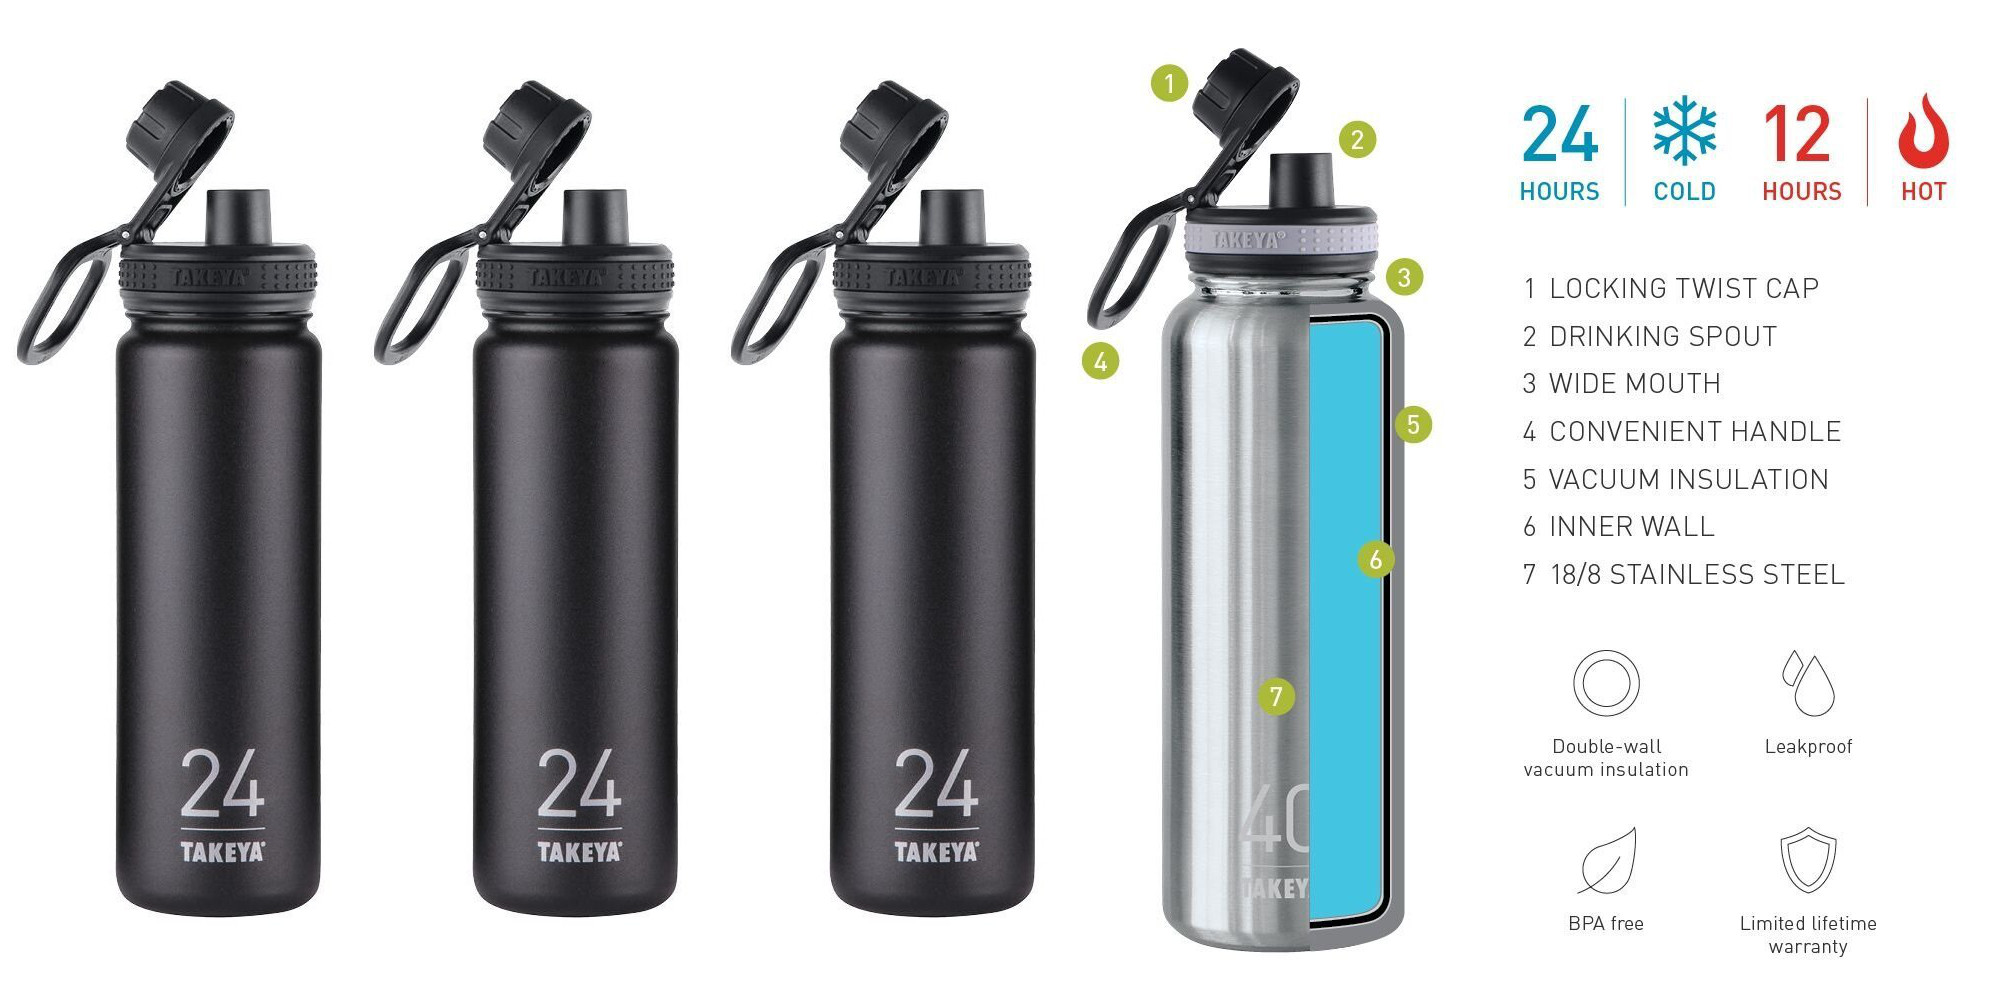 Takeya 24-oz Insulated Stainless Steel Water Bottle from $17 Prime shipped